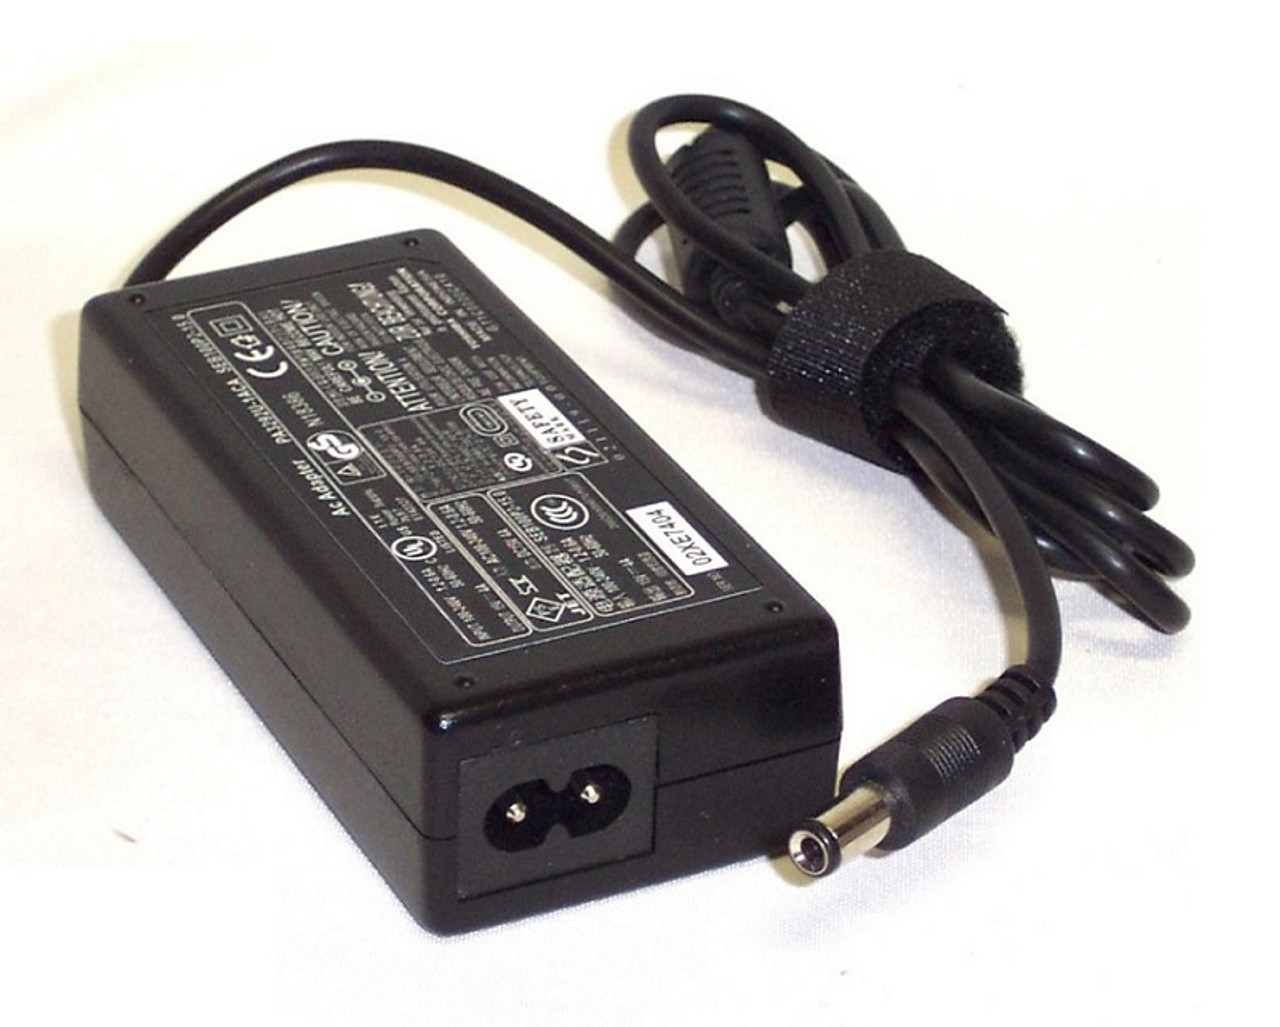 07KP4X - Dell 65-Watts AC Adapter for Latitude